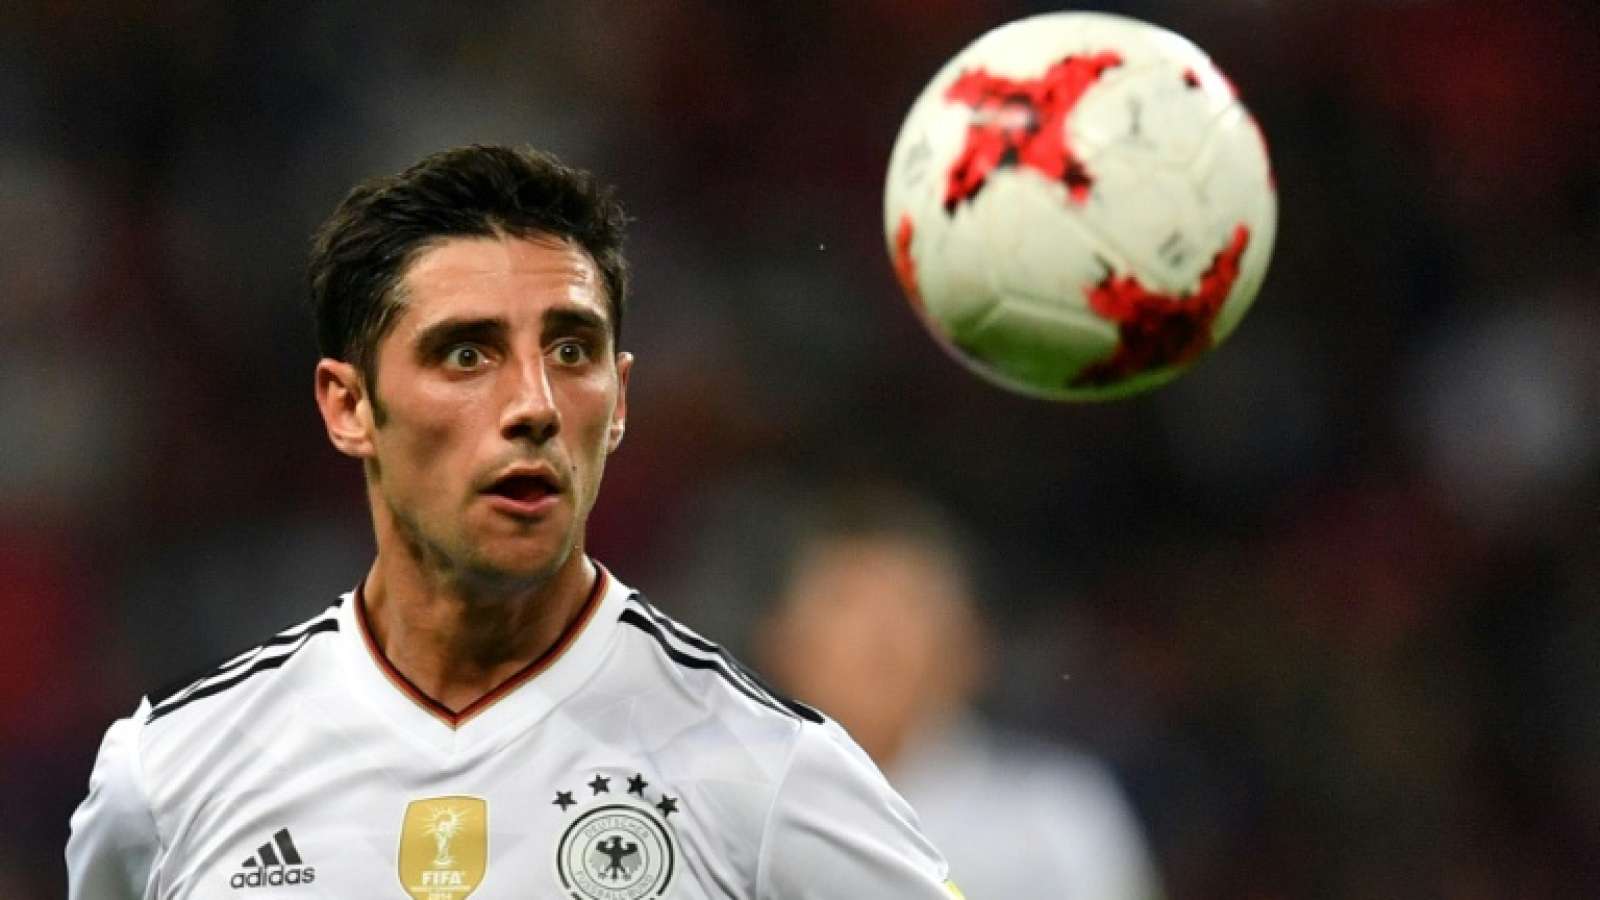 Loew: Manager's Confederations Cup policy pays off for Stindl